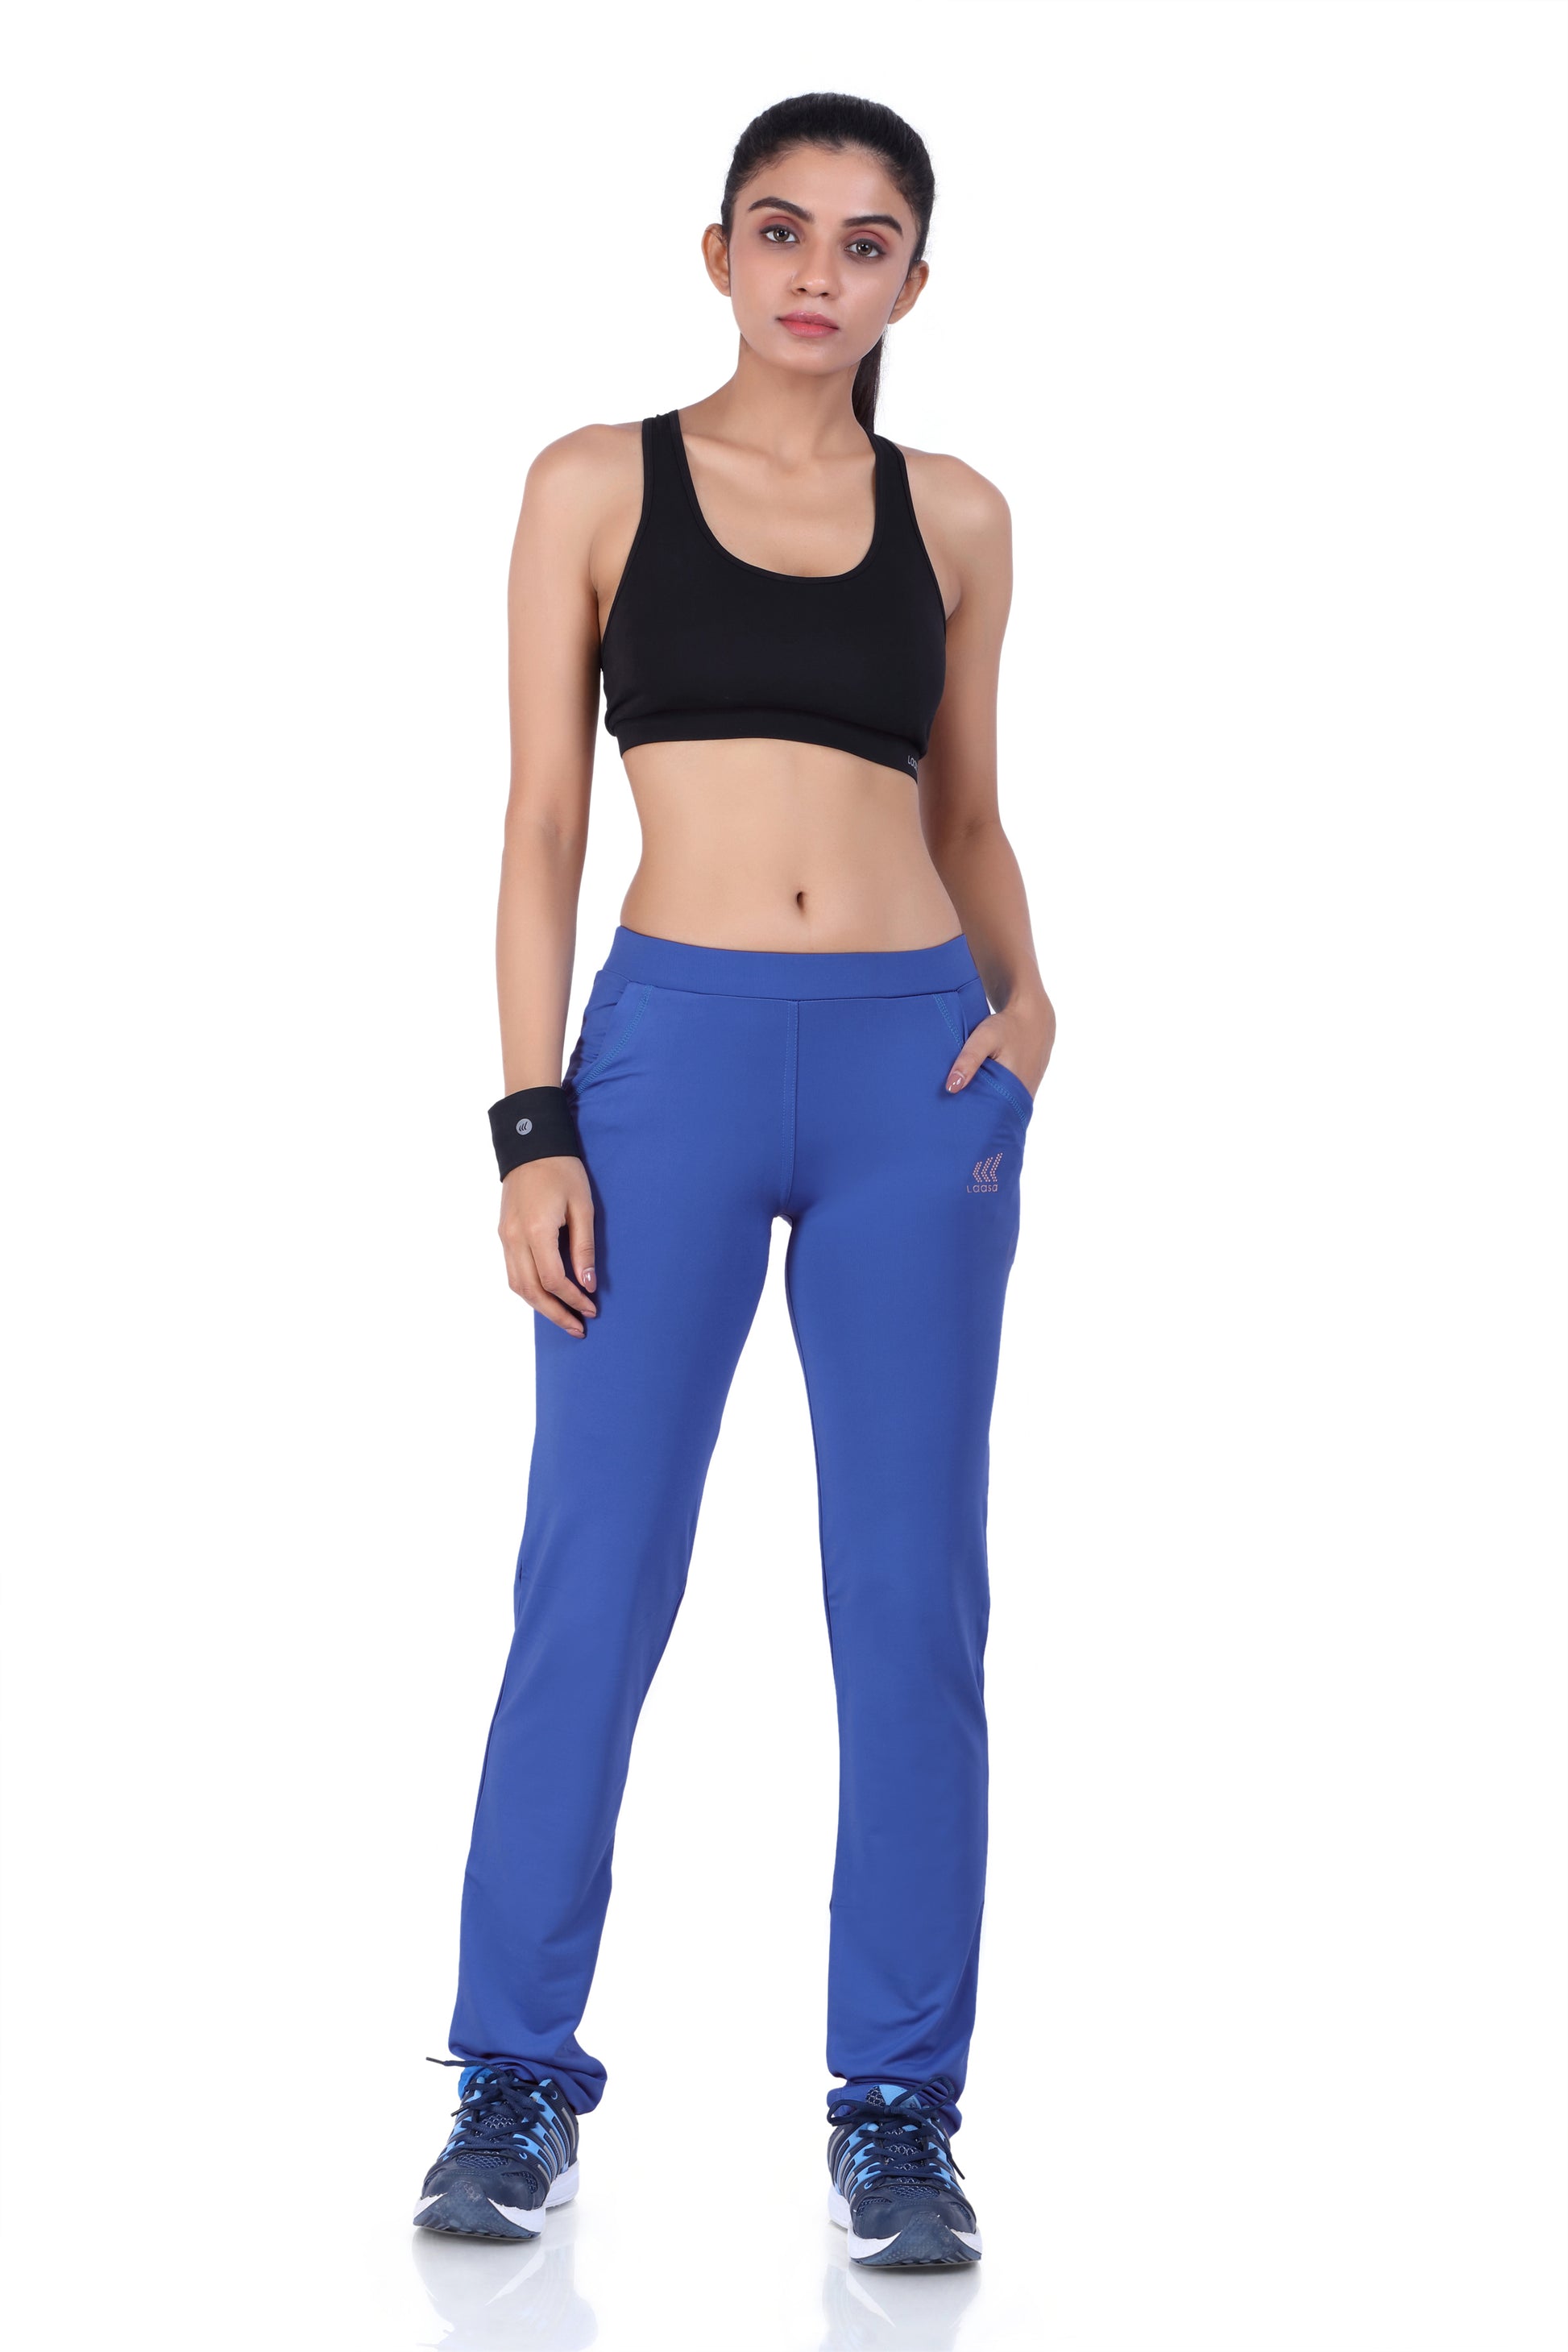 Laasa Sports - WOMEN'S ESSENTIAL WALKING TRACK PANTS The Essentials Running  Track pant from Laasa bring comfort and an easy feel to your everyday  ensemble. #LAASA #active #oufitstyle #sportyoutfit #sportylook #sportygirl  #sporty #